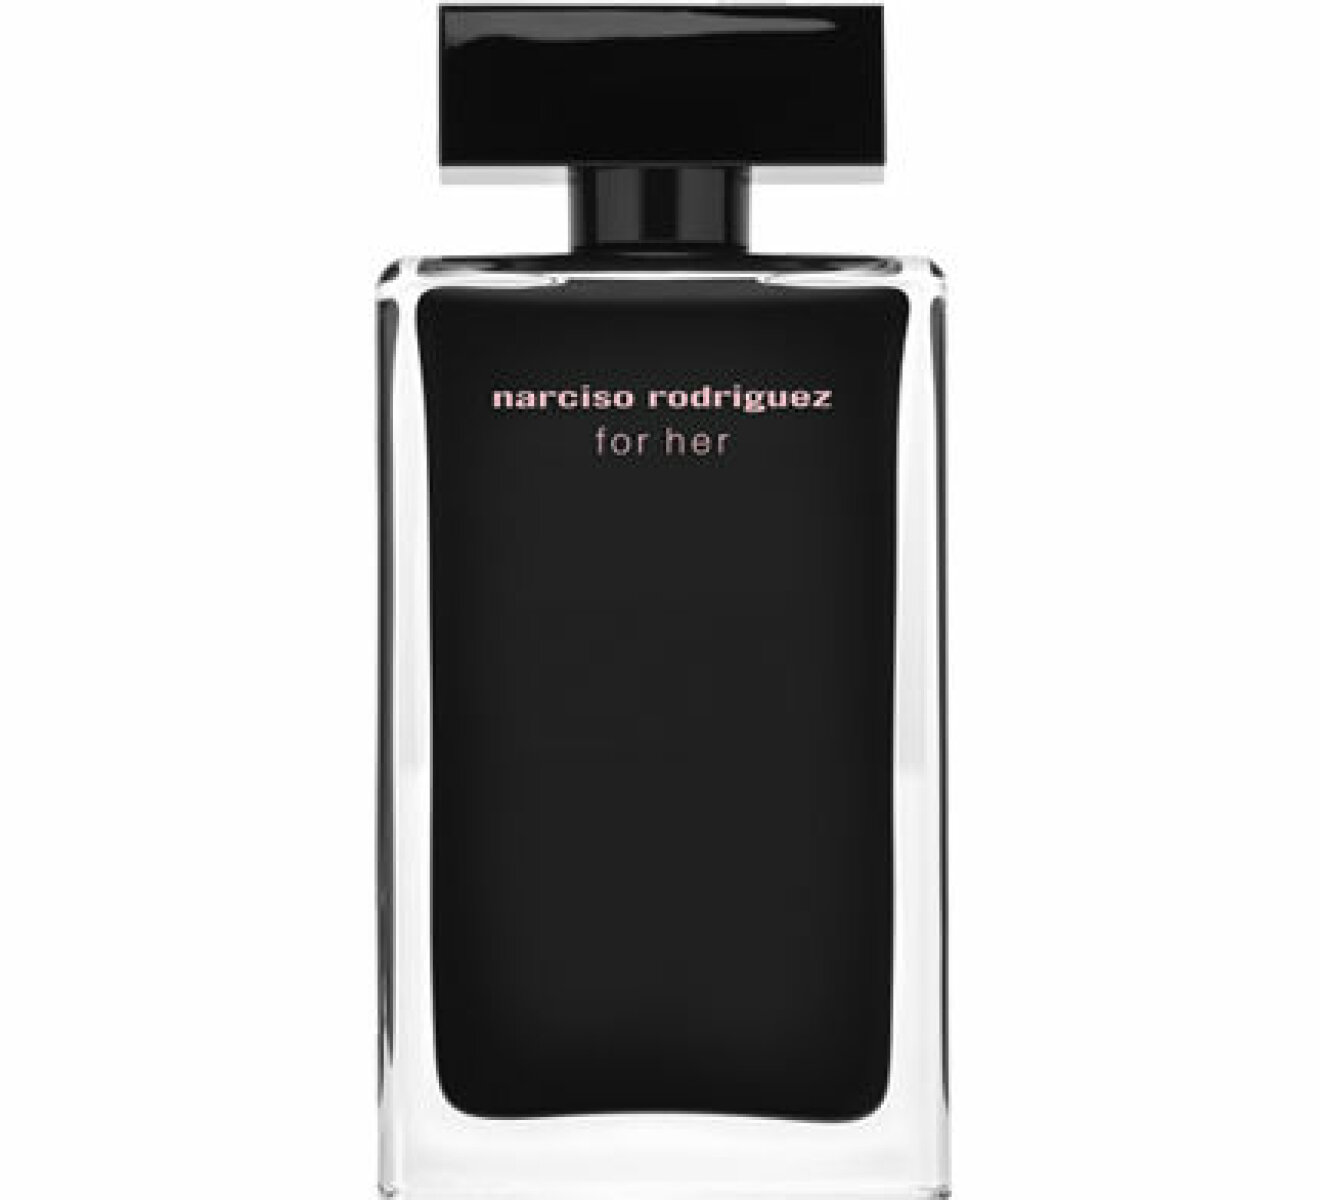 Musc for her från Narciso Rodriguez